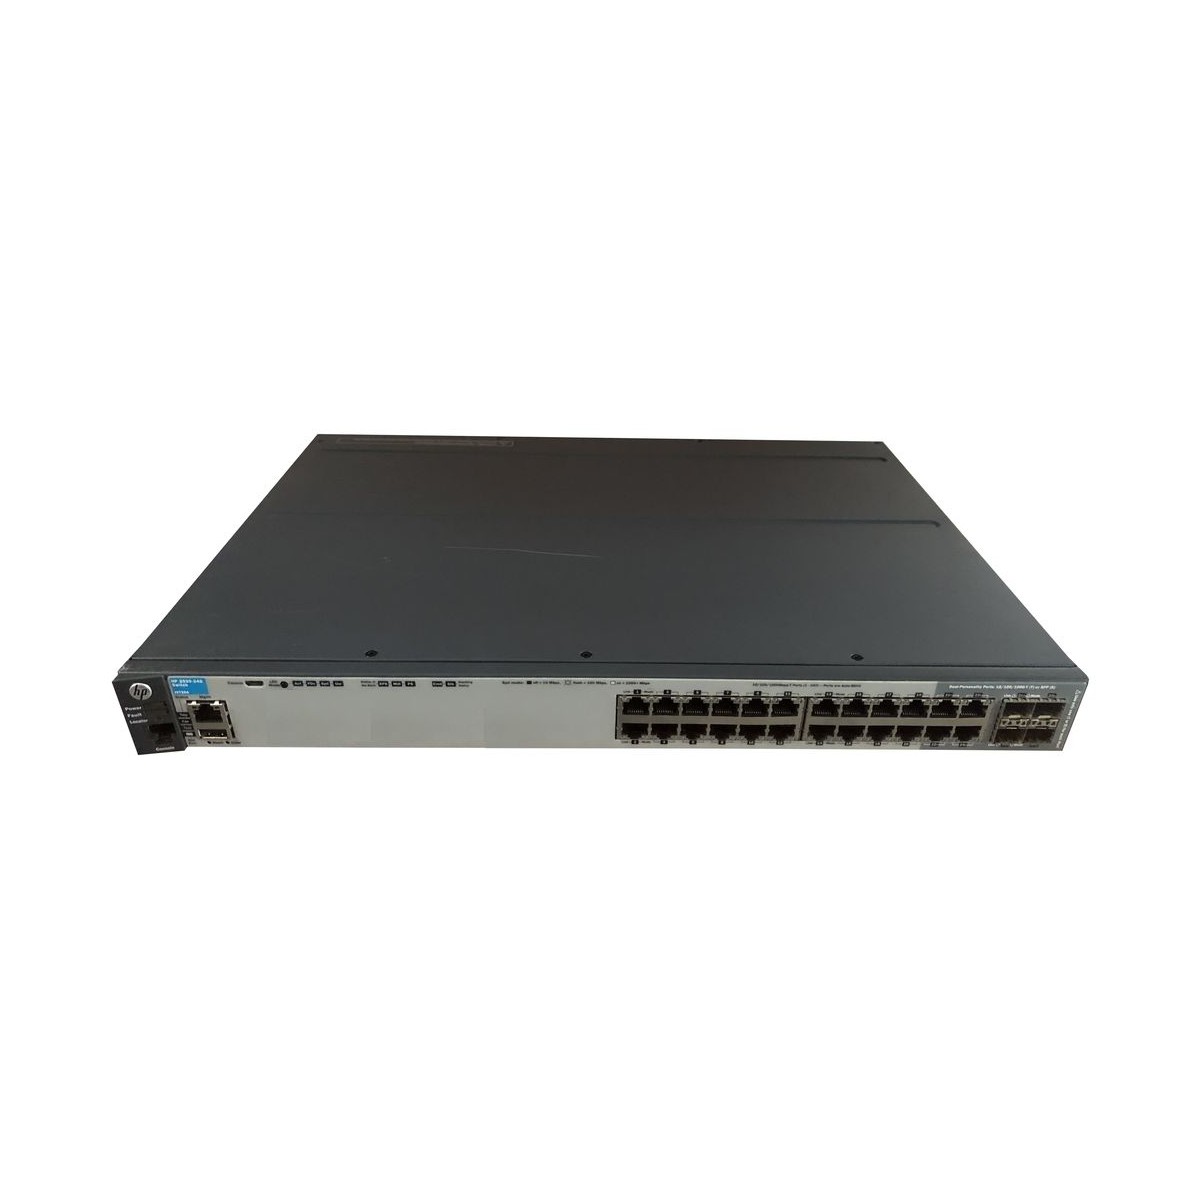 SWITCH HP 2920-24G MANAGED 24x1GB 4xSFP J9726A